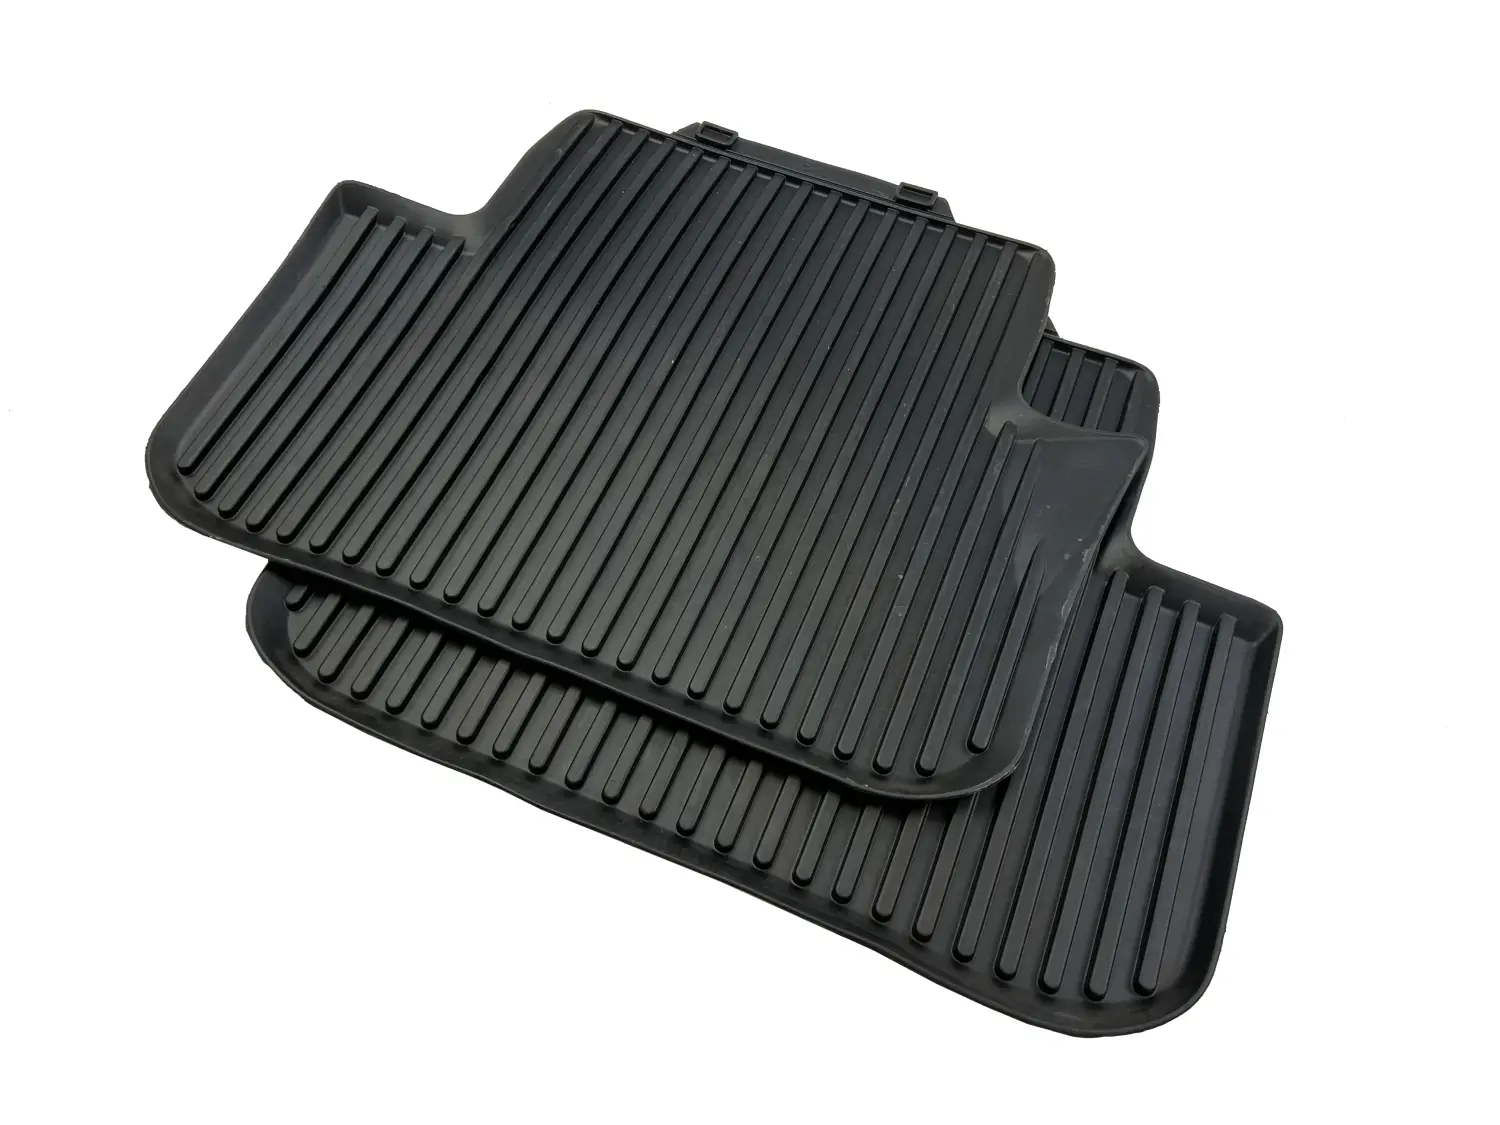 Audi Cargo Mat (A4 A5 S4 S5 RS5 B8, Sedan & Coupe) 8K5061180 by